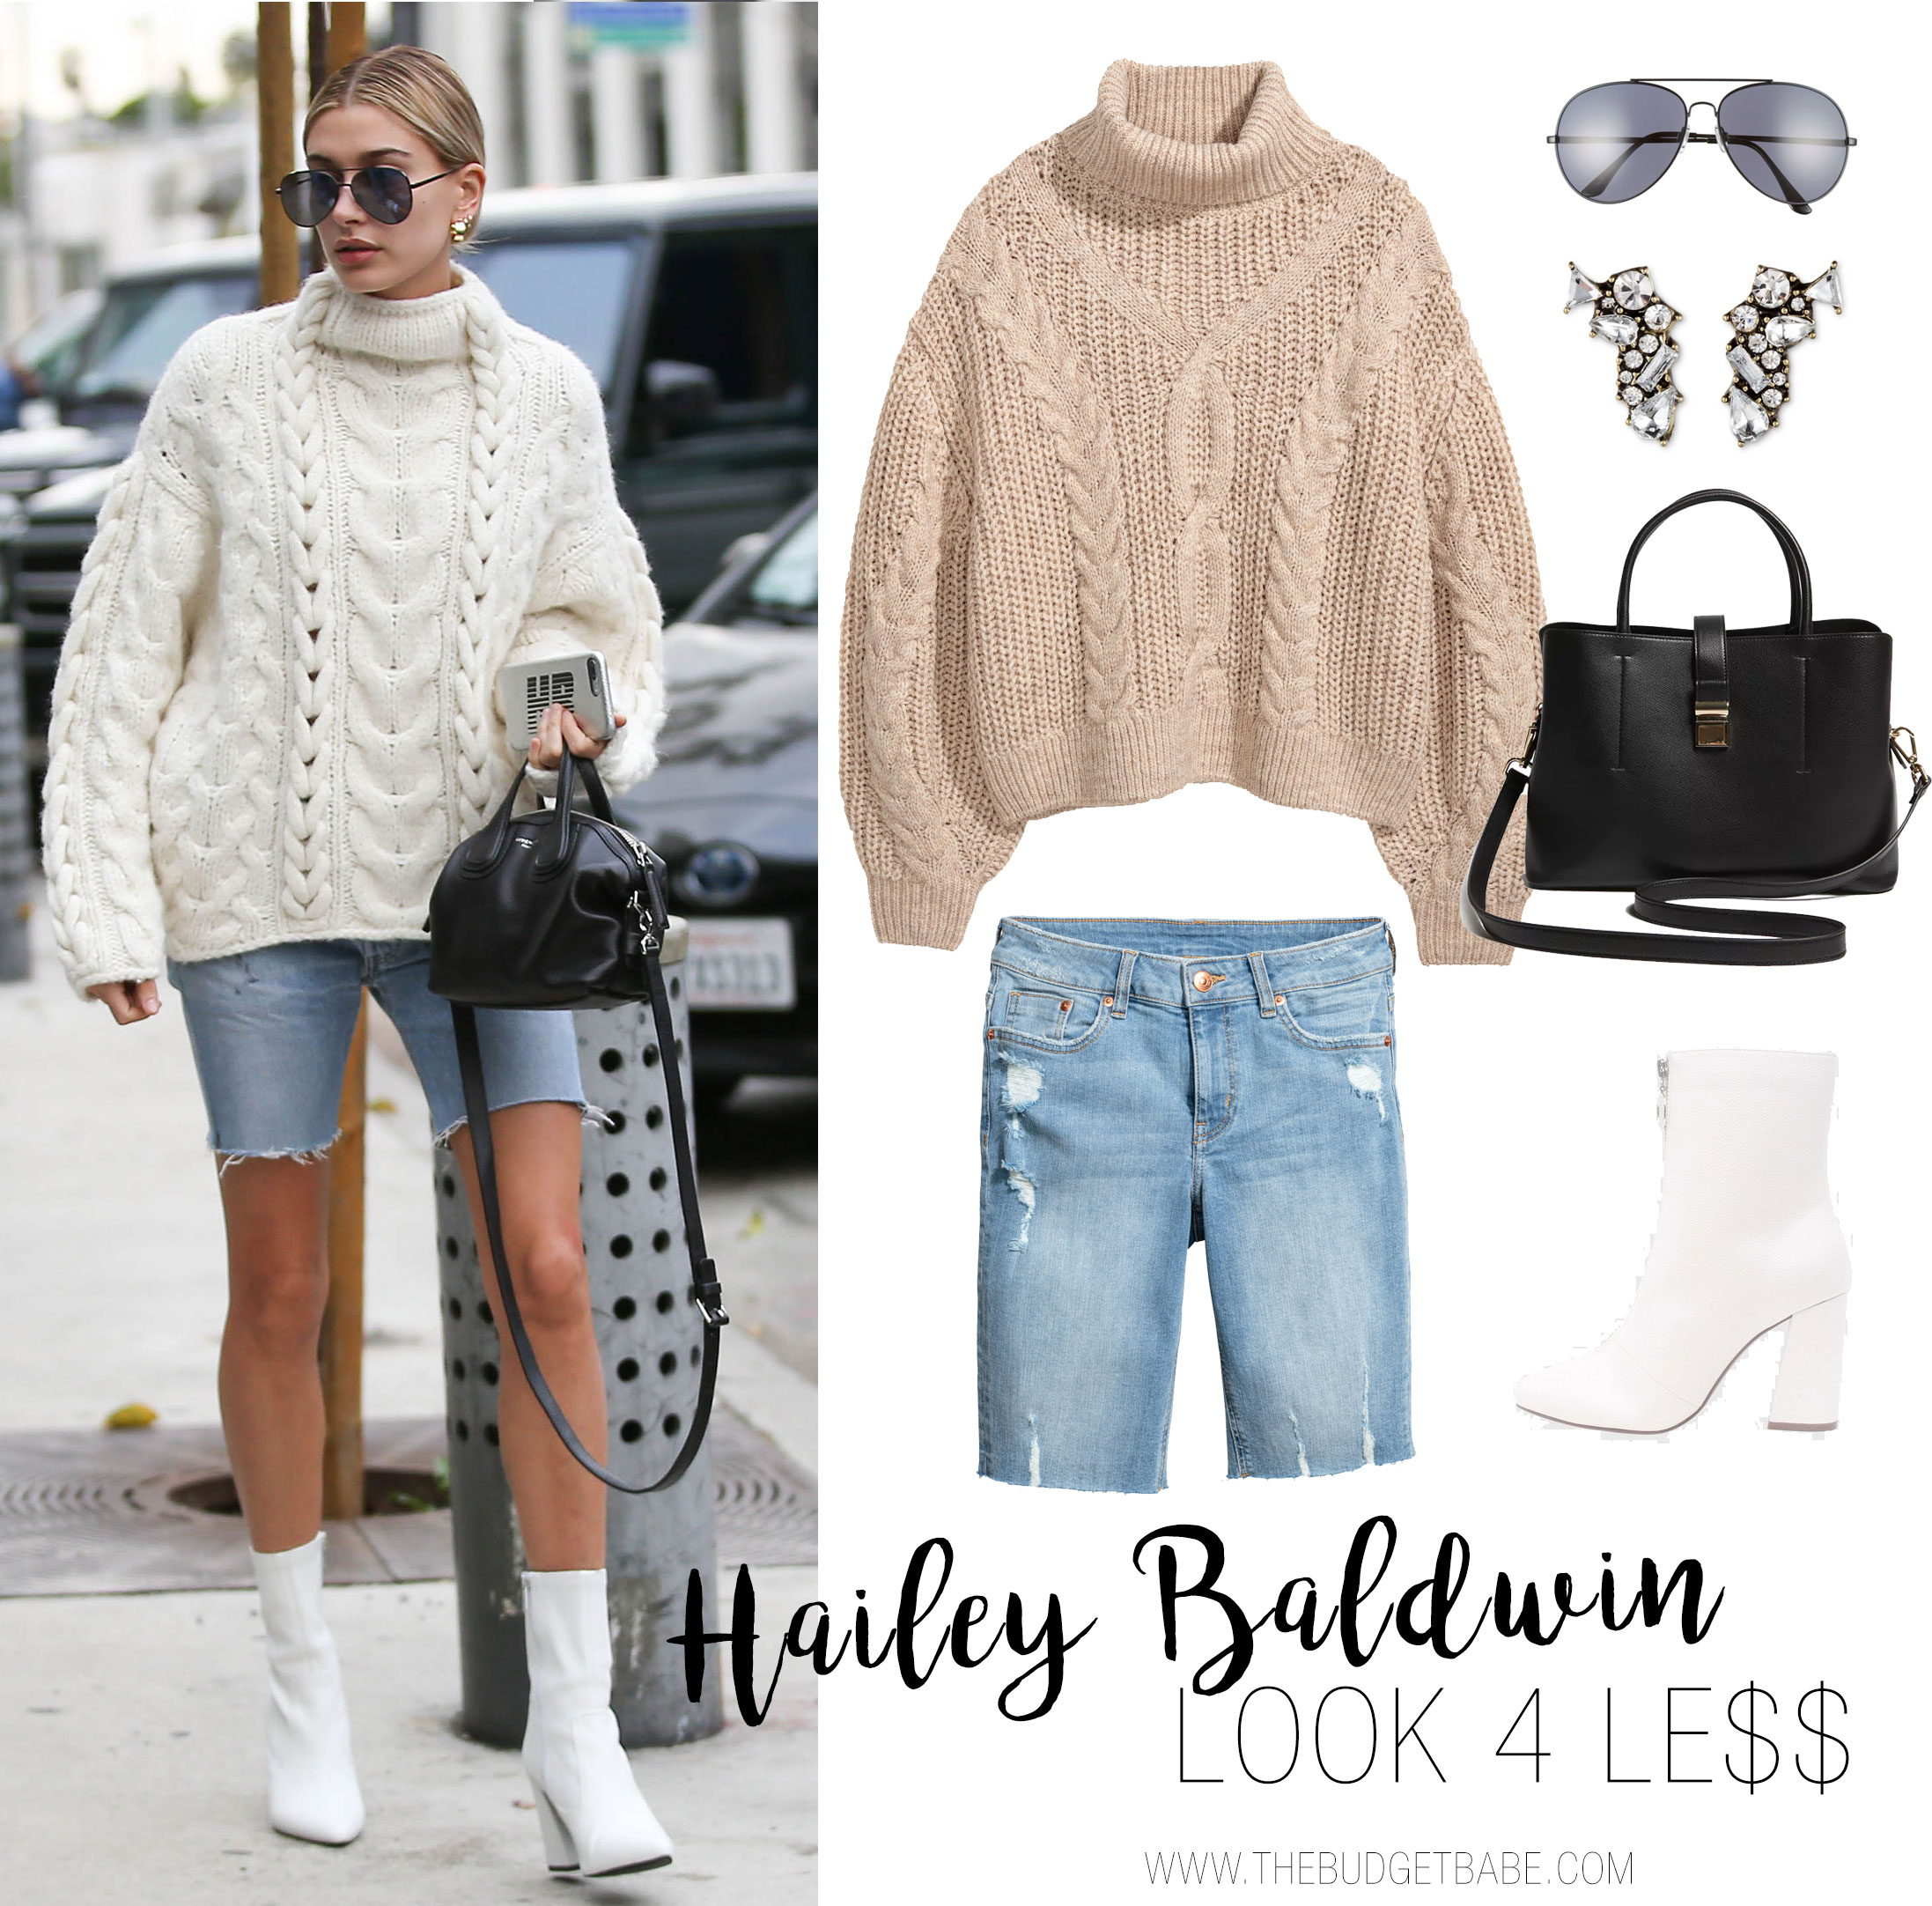 Hailey Baldwin's oversized Iro sweater, denim shorts and white ankle booties celebrity look for less